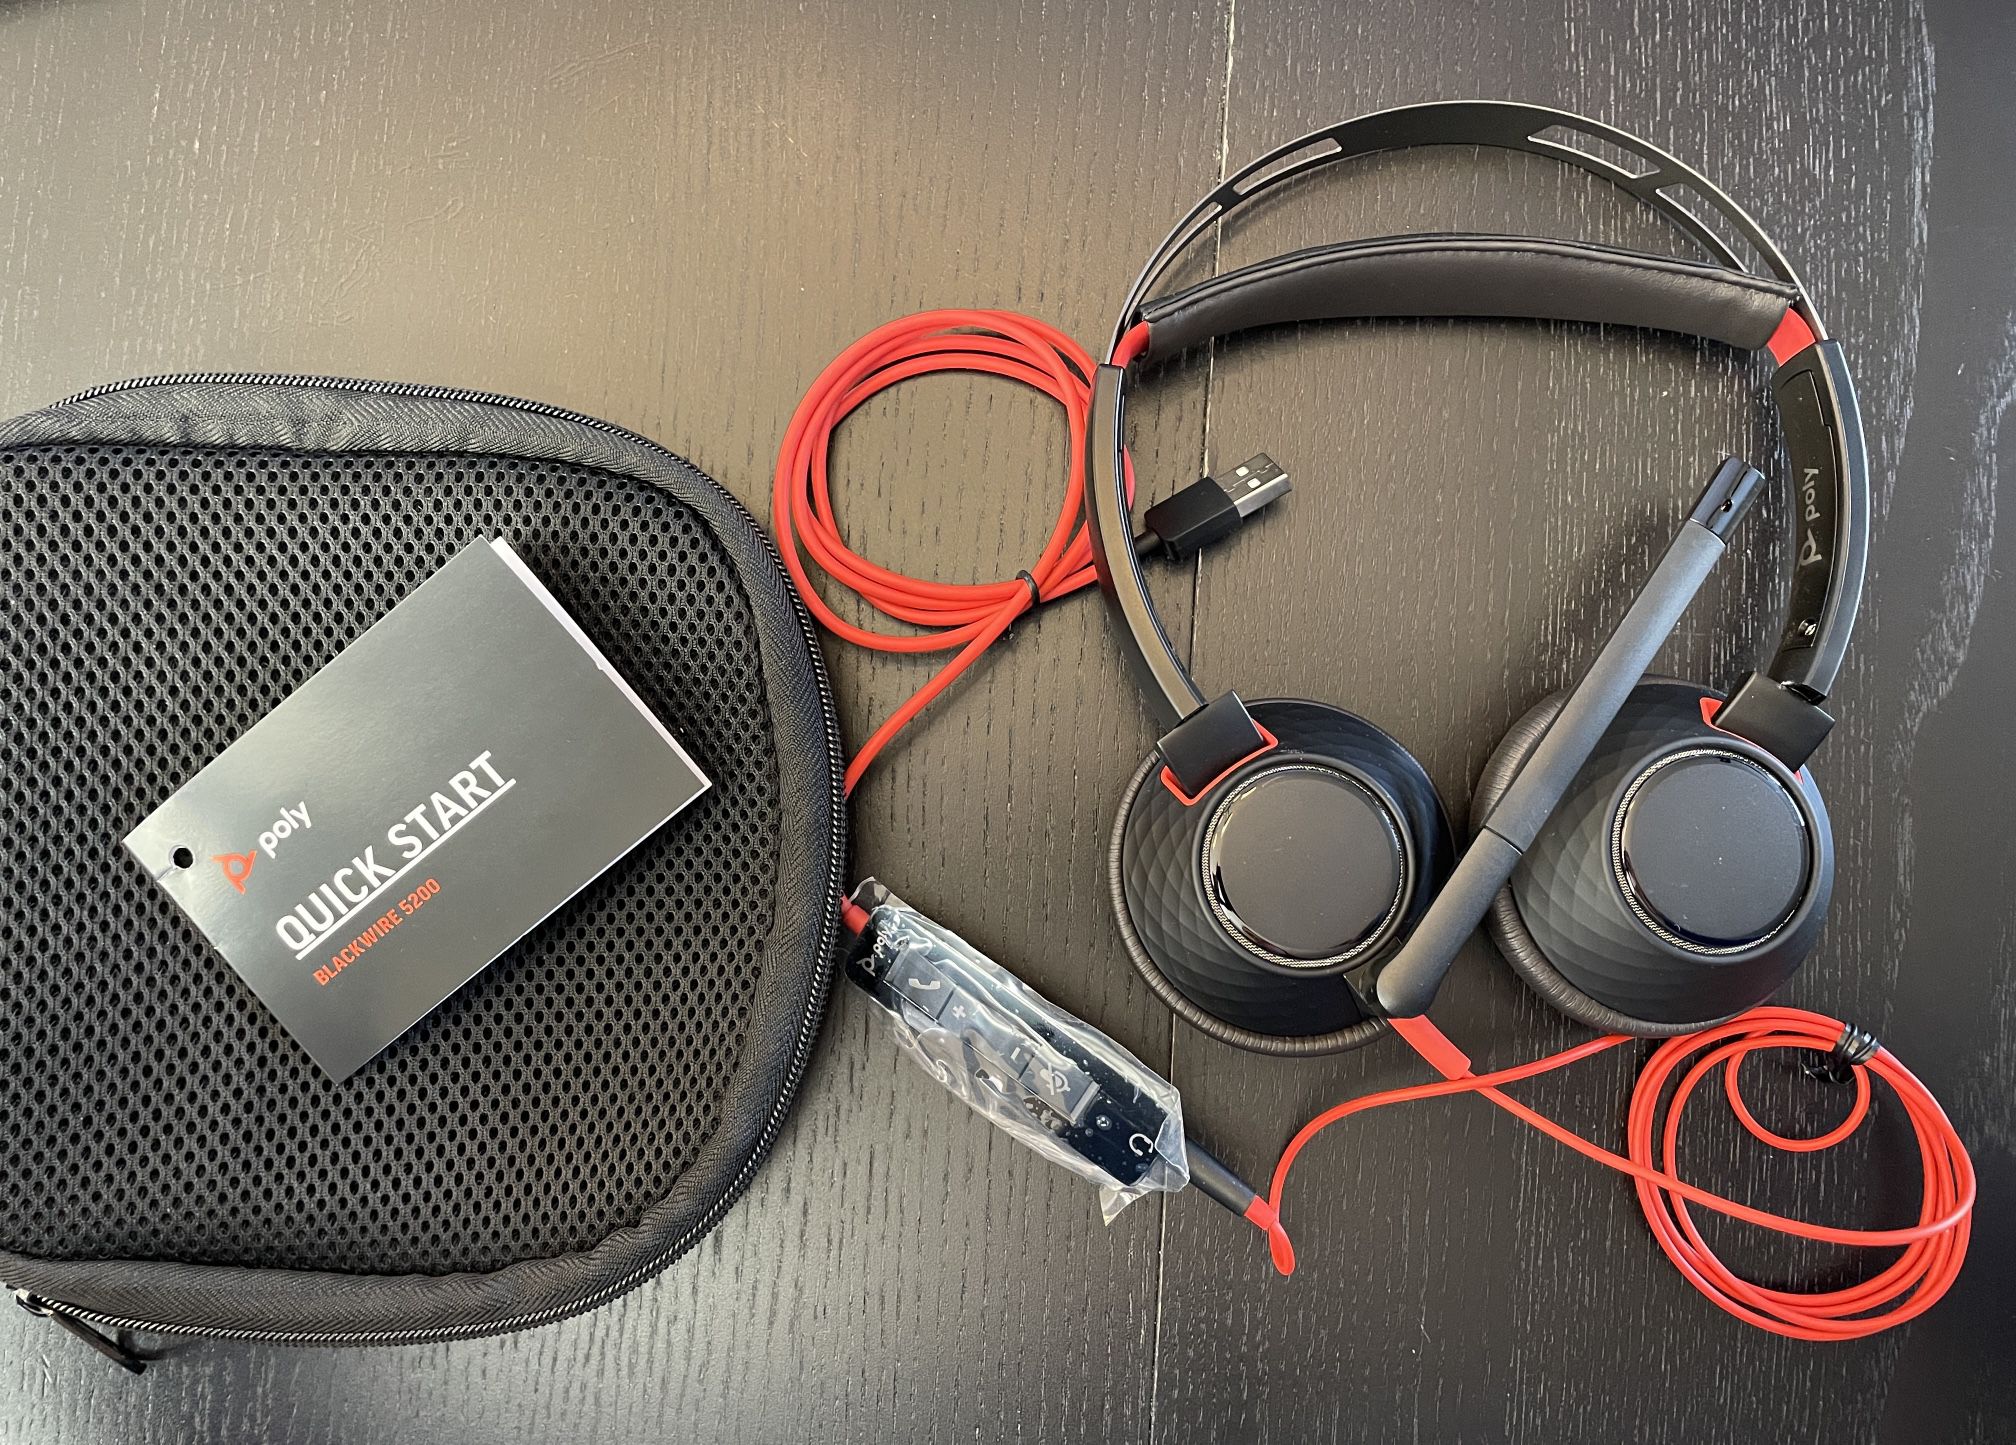 New Blackwire 5200 USB Wired Headset